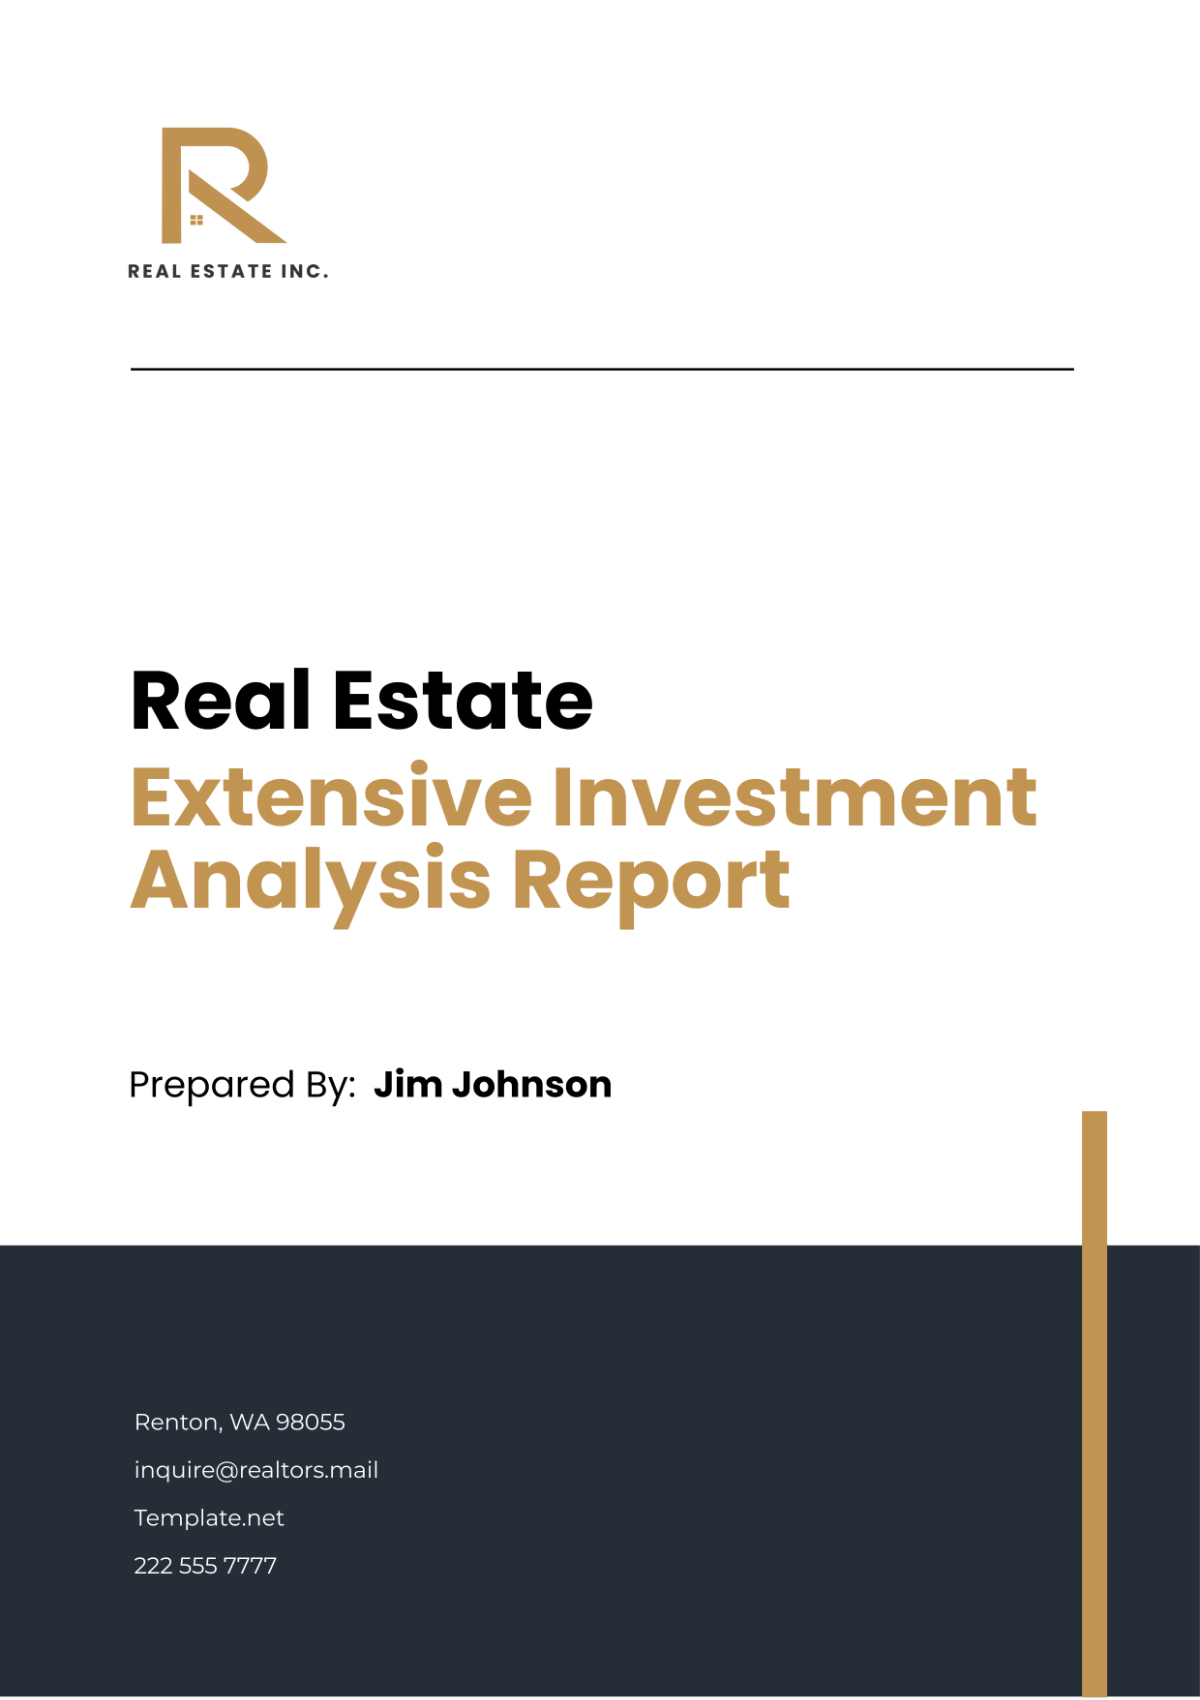 Real Estate Extensive Investment Analysis Report Template